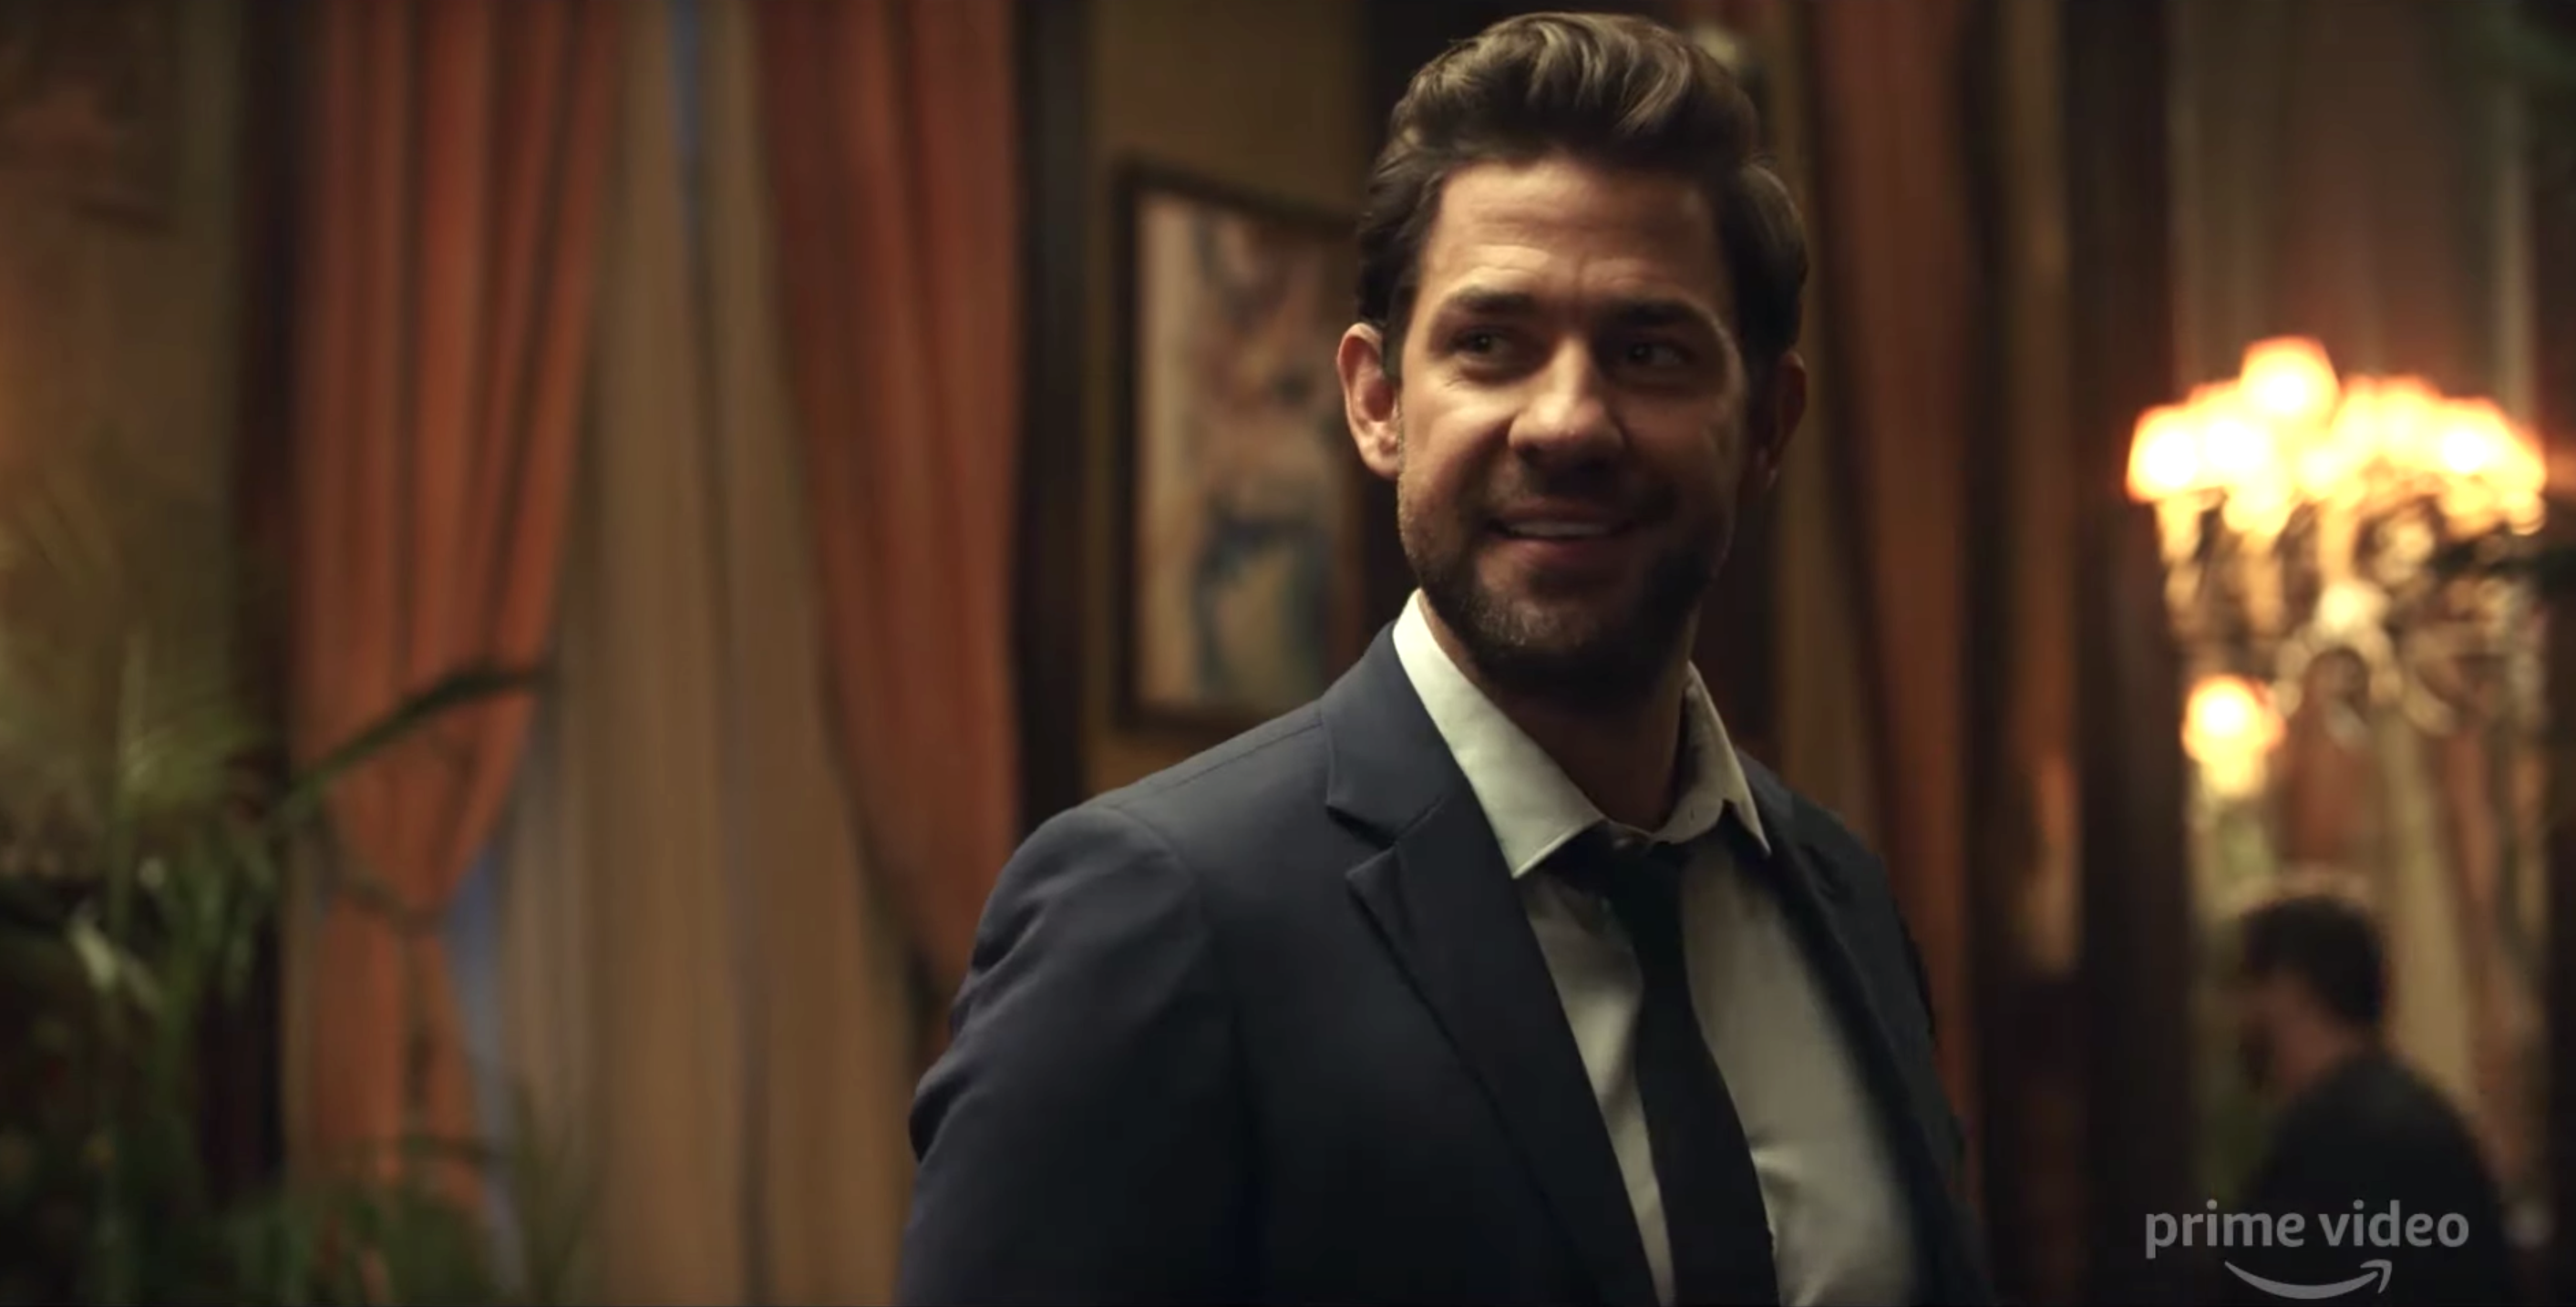 Surichinmoi Med venlig hilsen tand Tom Clancy's Jack Ryan returns with a first look at season 2